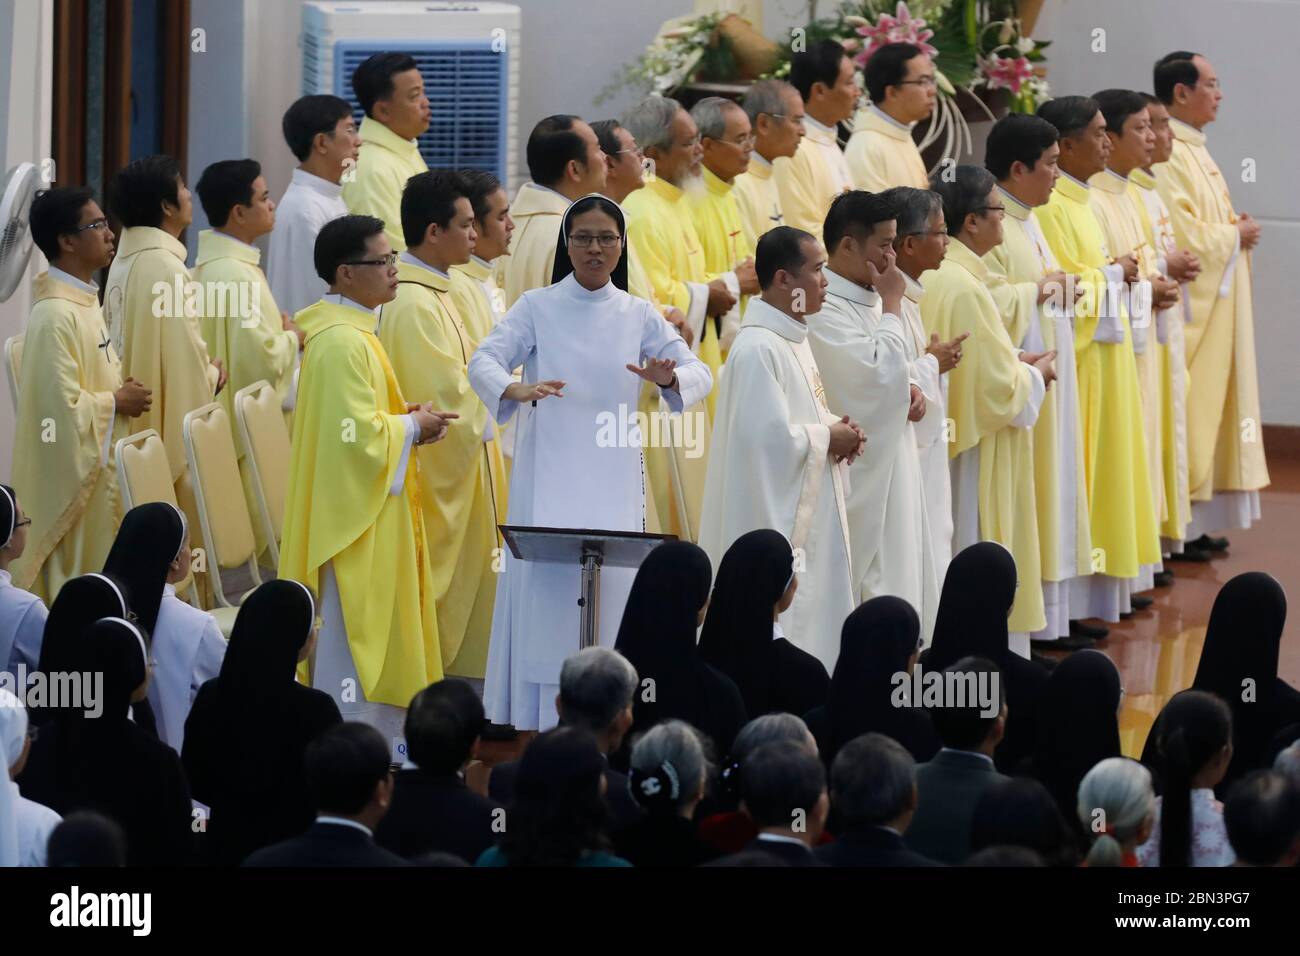 Dominican community.  Perpetual vows and consecration of virgins. Catholic mass.  Bien Hoa. Vietnam. Stock Photo